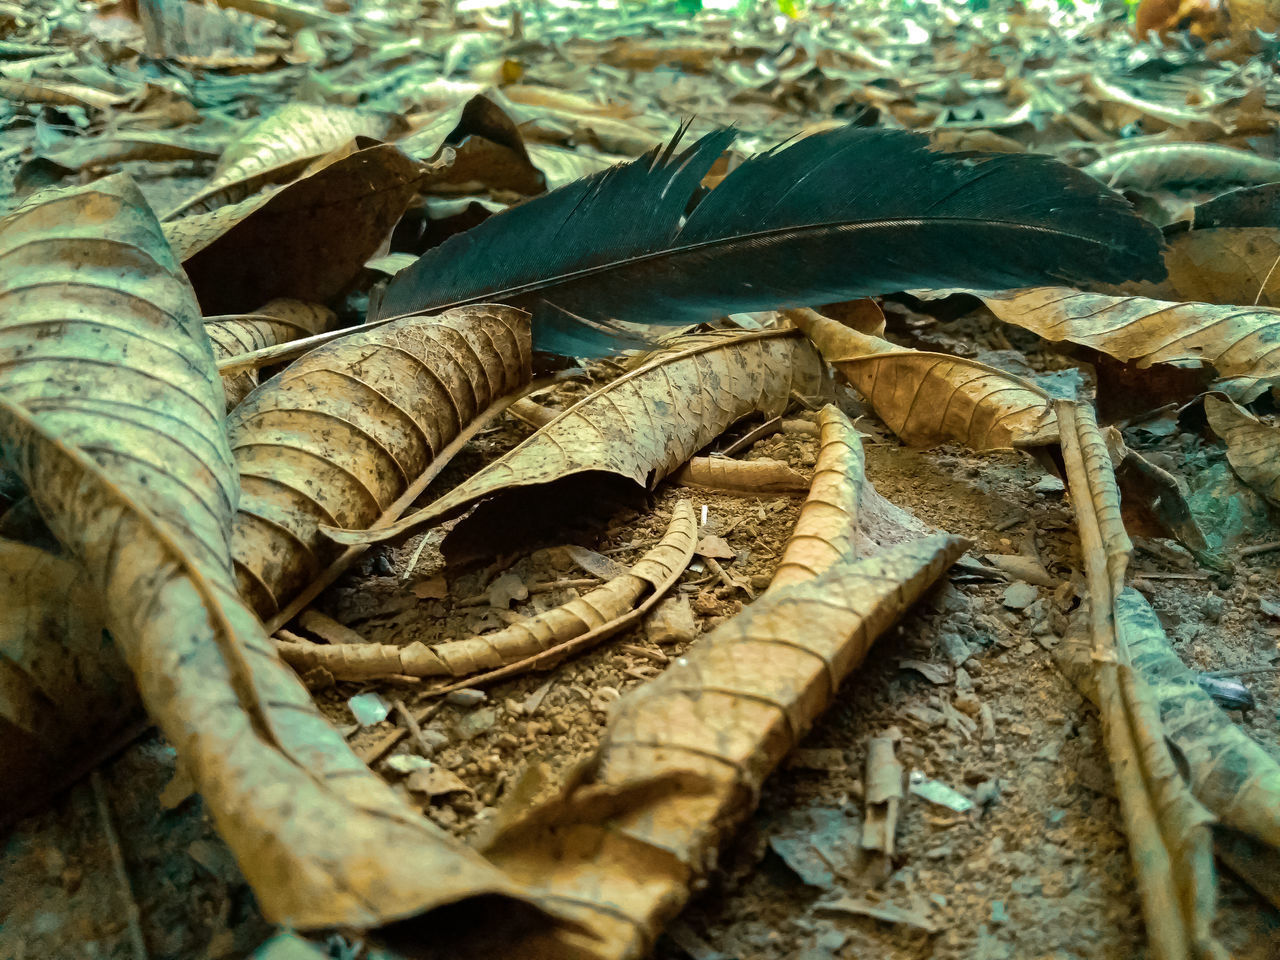 HIGH ANGLE VIEW OF DRIED LEAVES ON WOOD